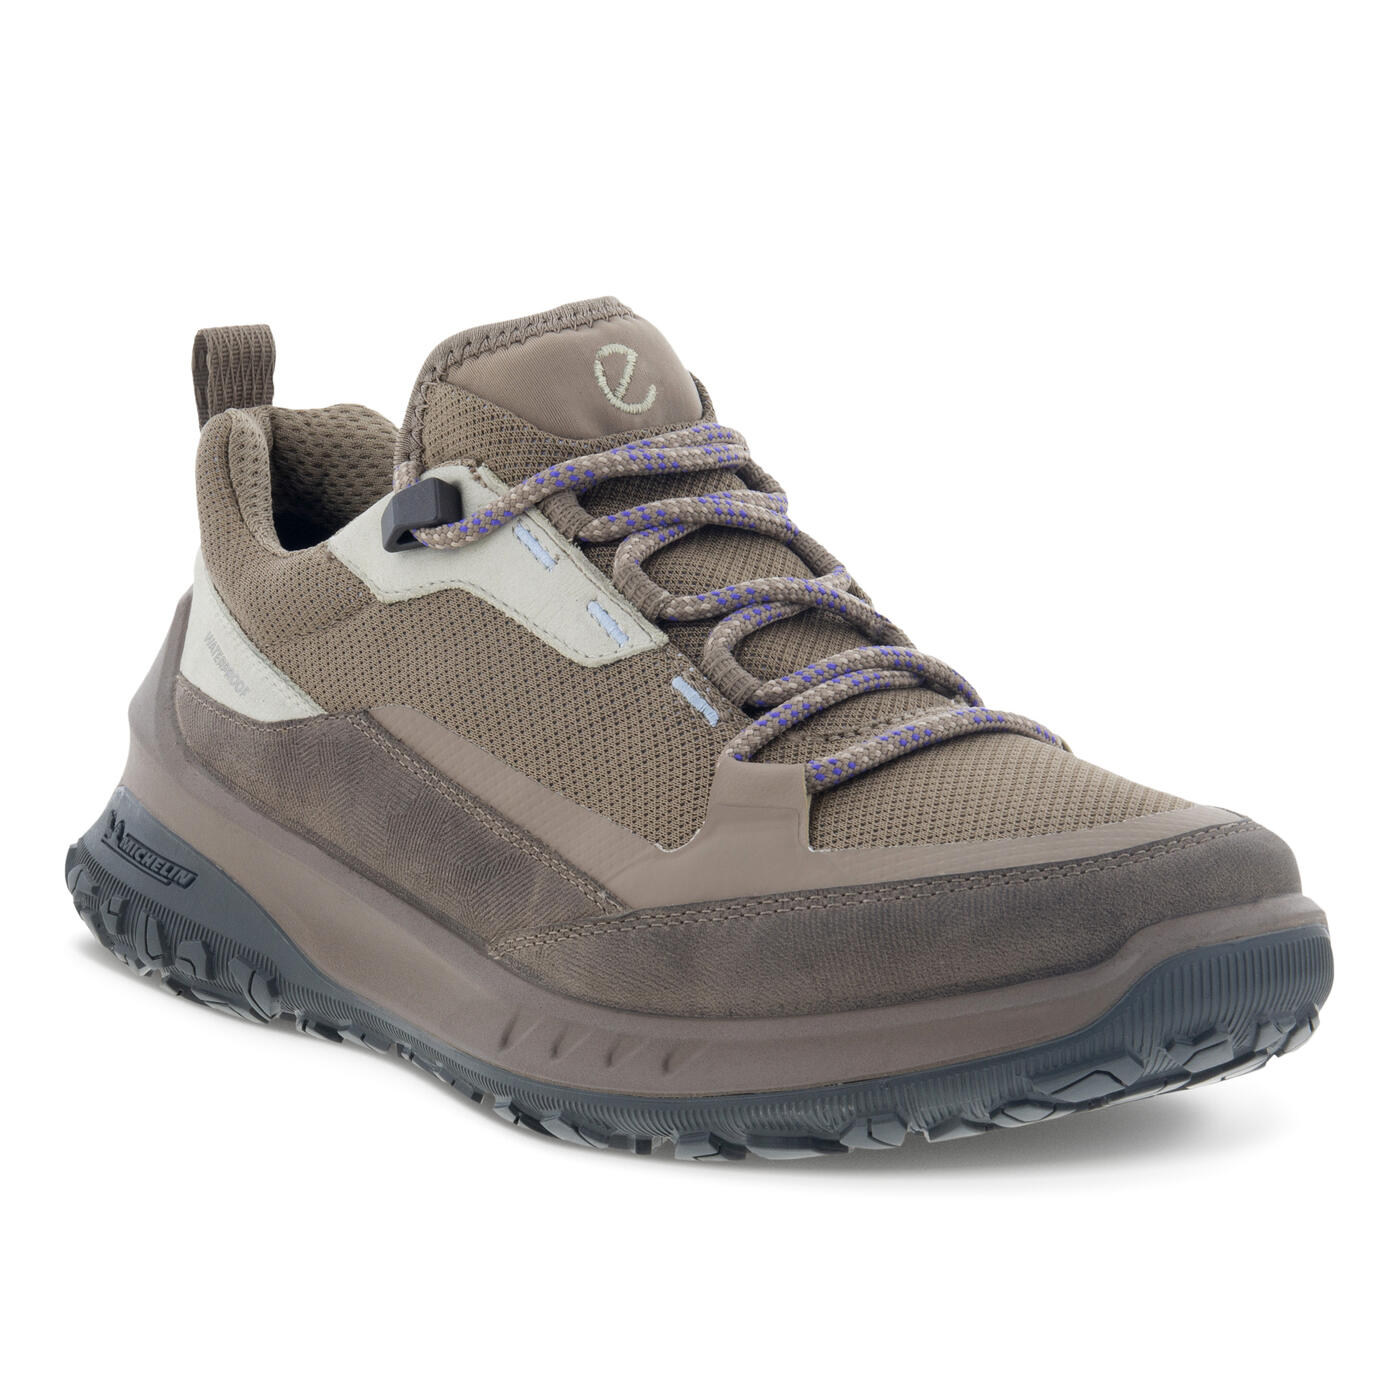 Ecco Women's Ult-trn Wp - Taupe/taupe 39